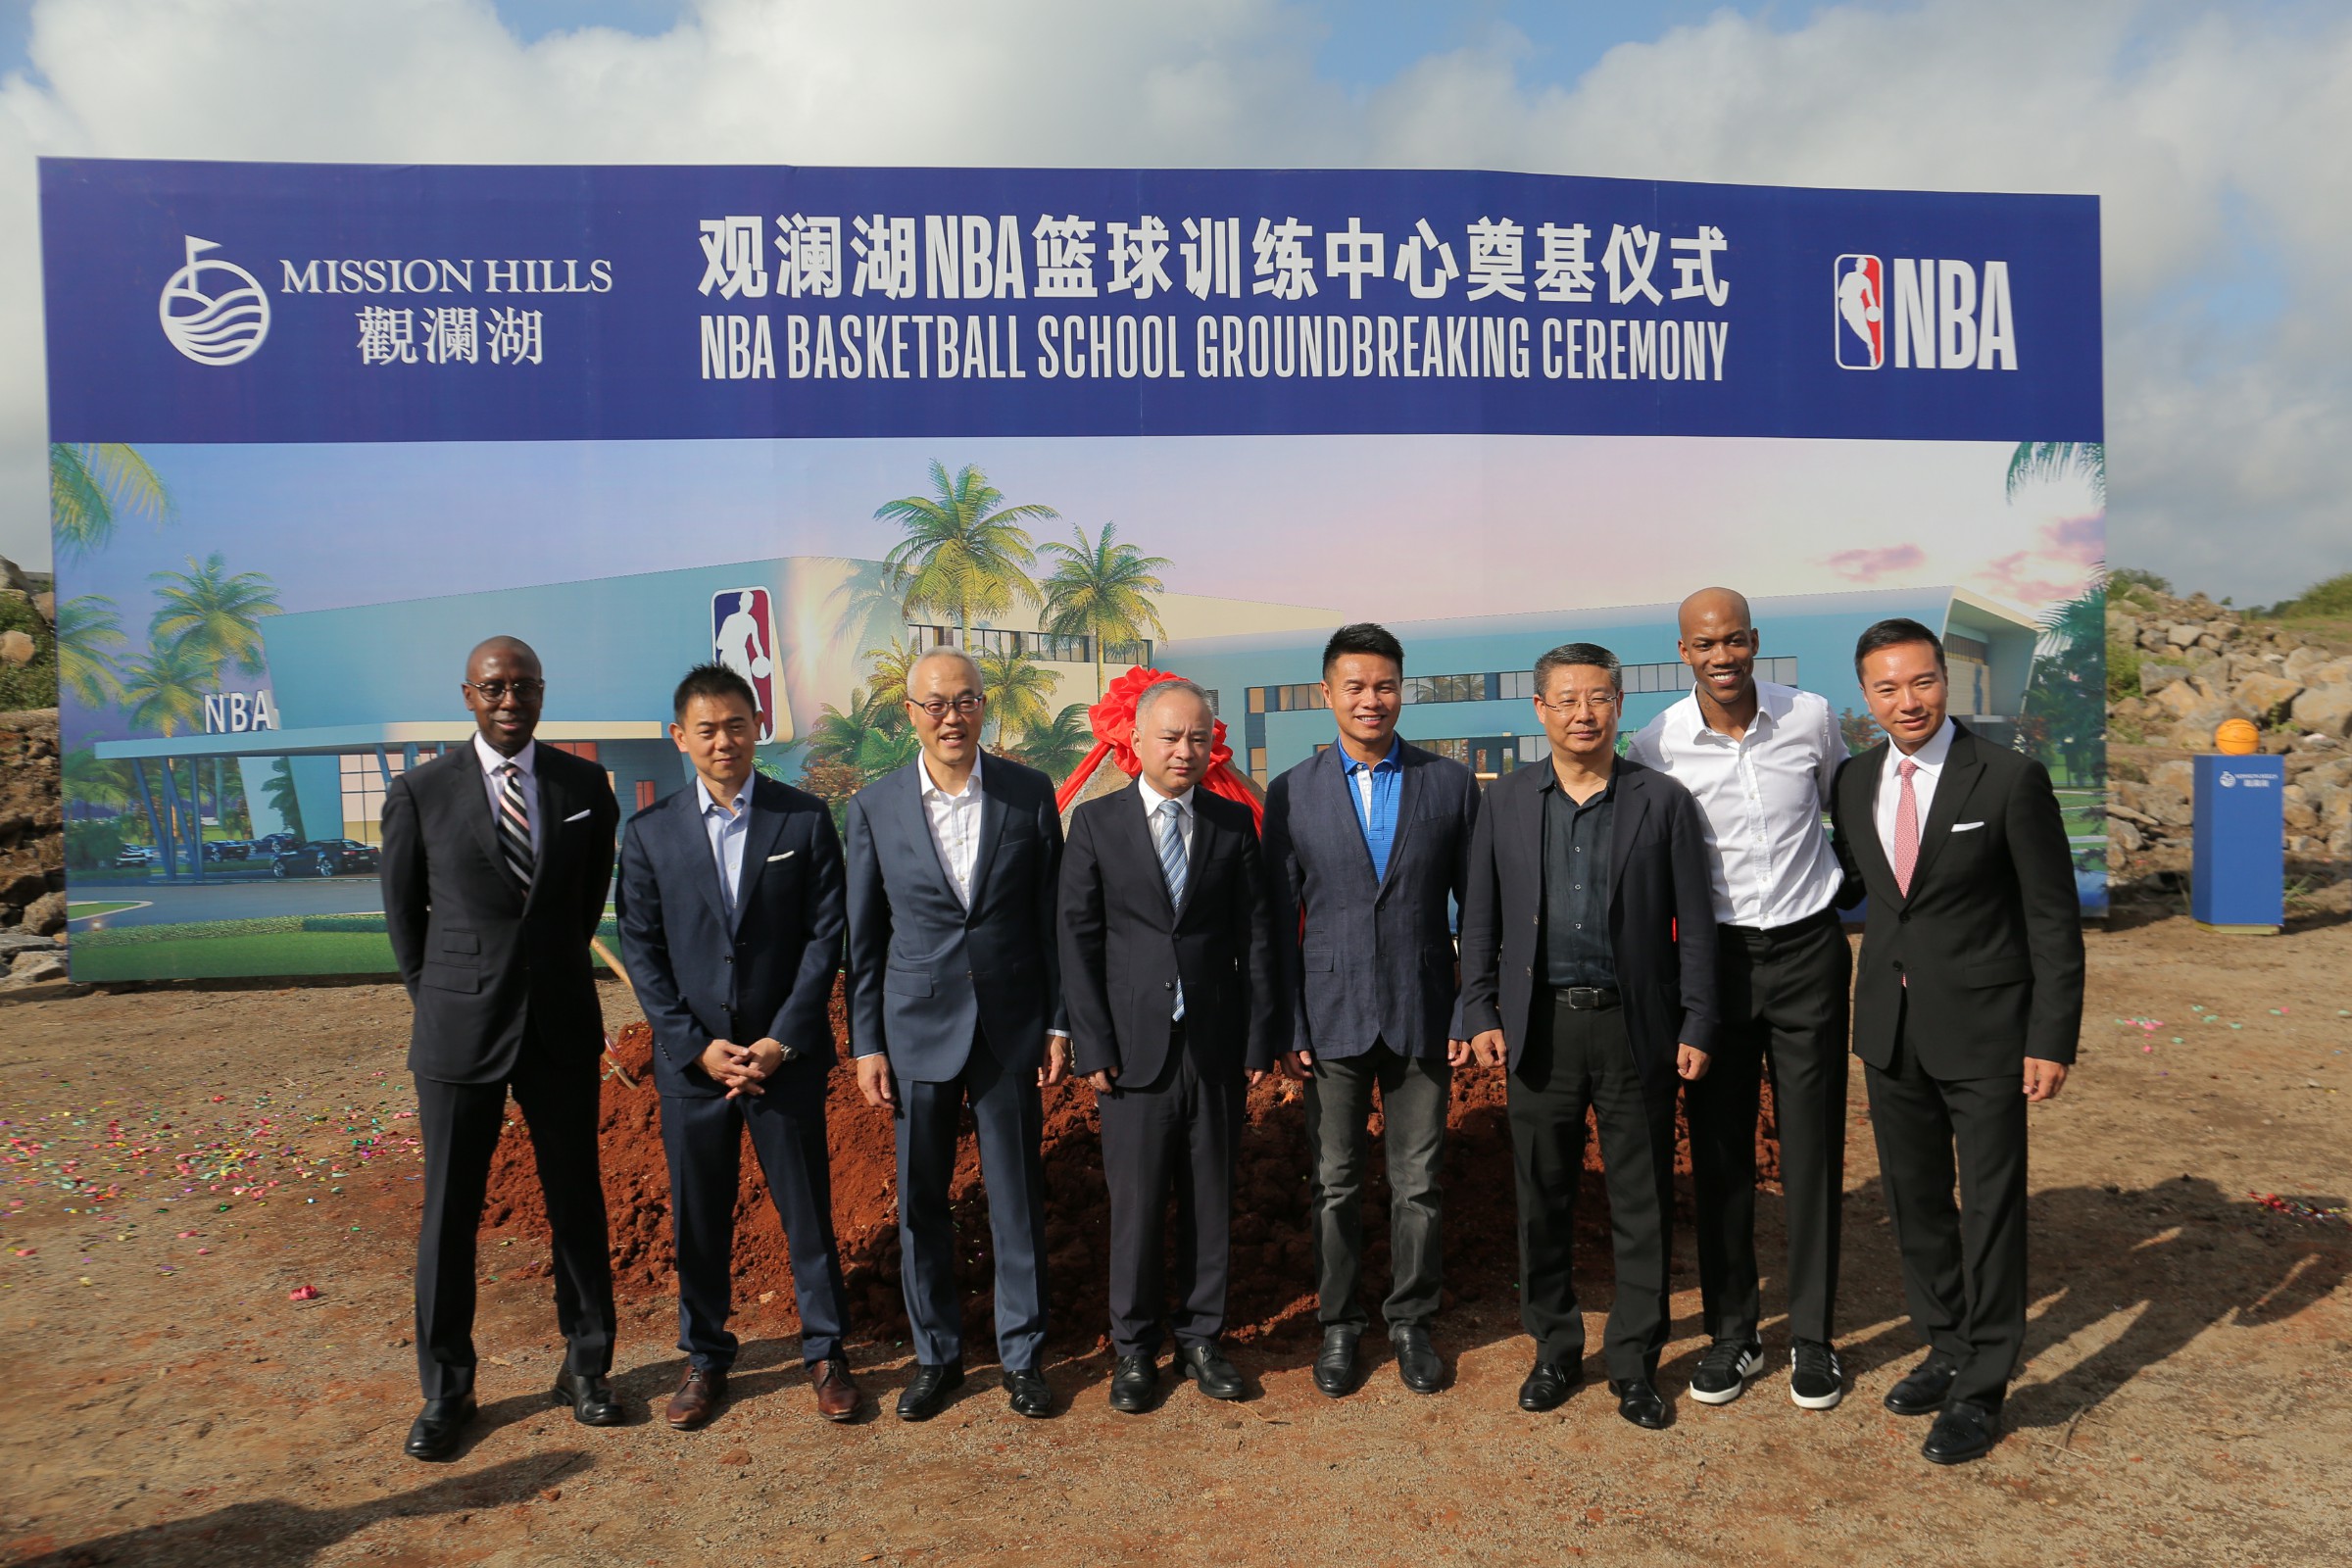 Photo 1 – Ground breaking ceremony for the NBA Basketball School at Mission Hills Haikou in Hainan, China